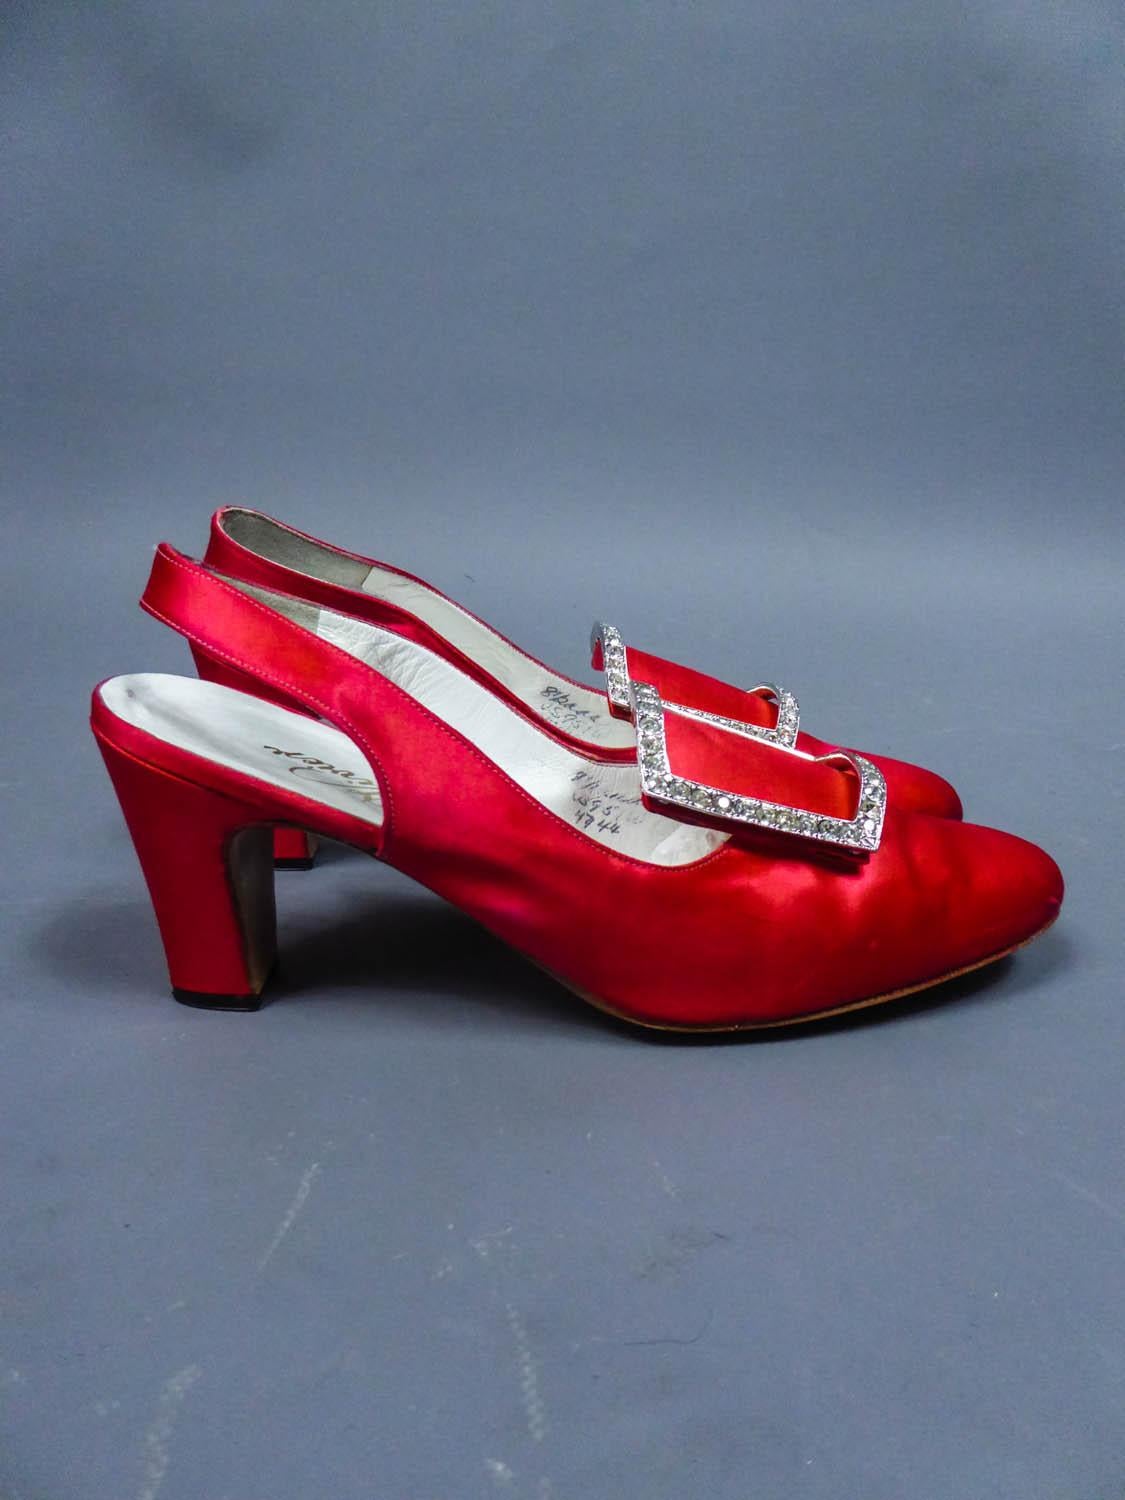 An Iconic and Collectible Pair of Roger Vivier Red Satin Pumps Circa 1970 1